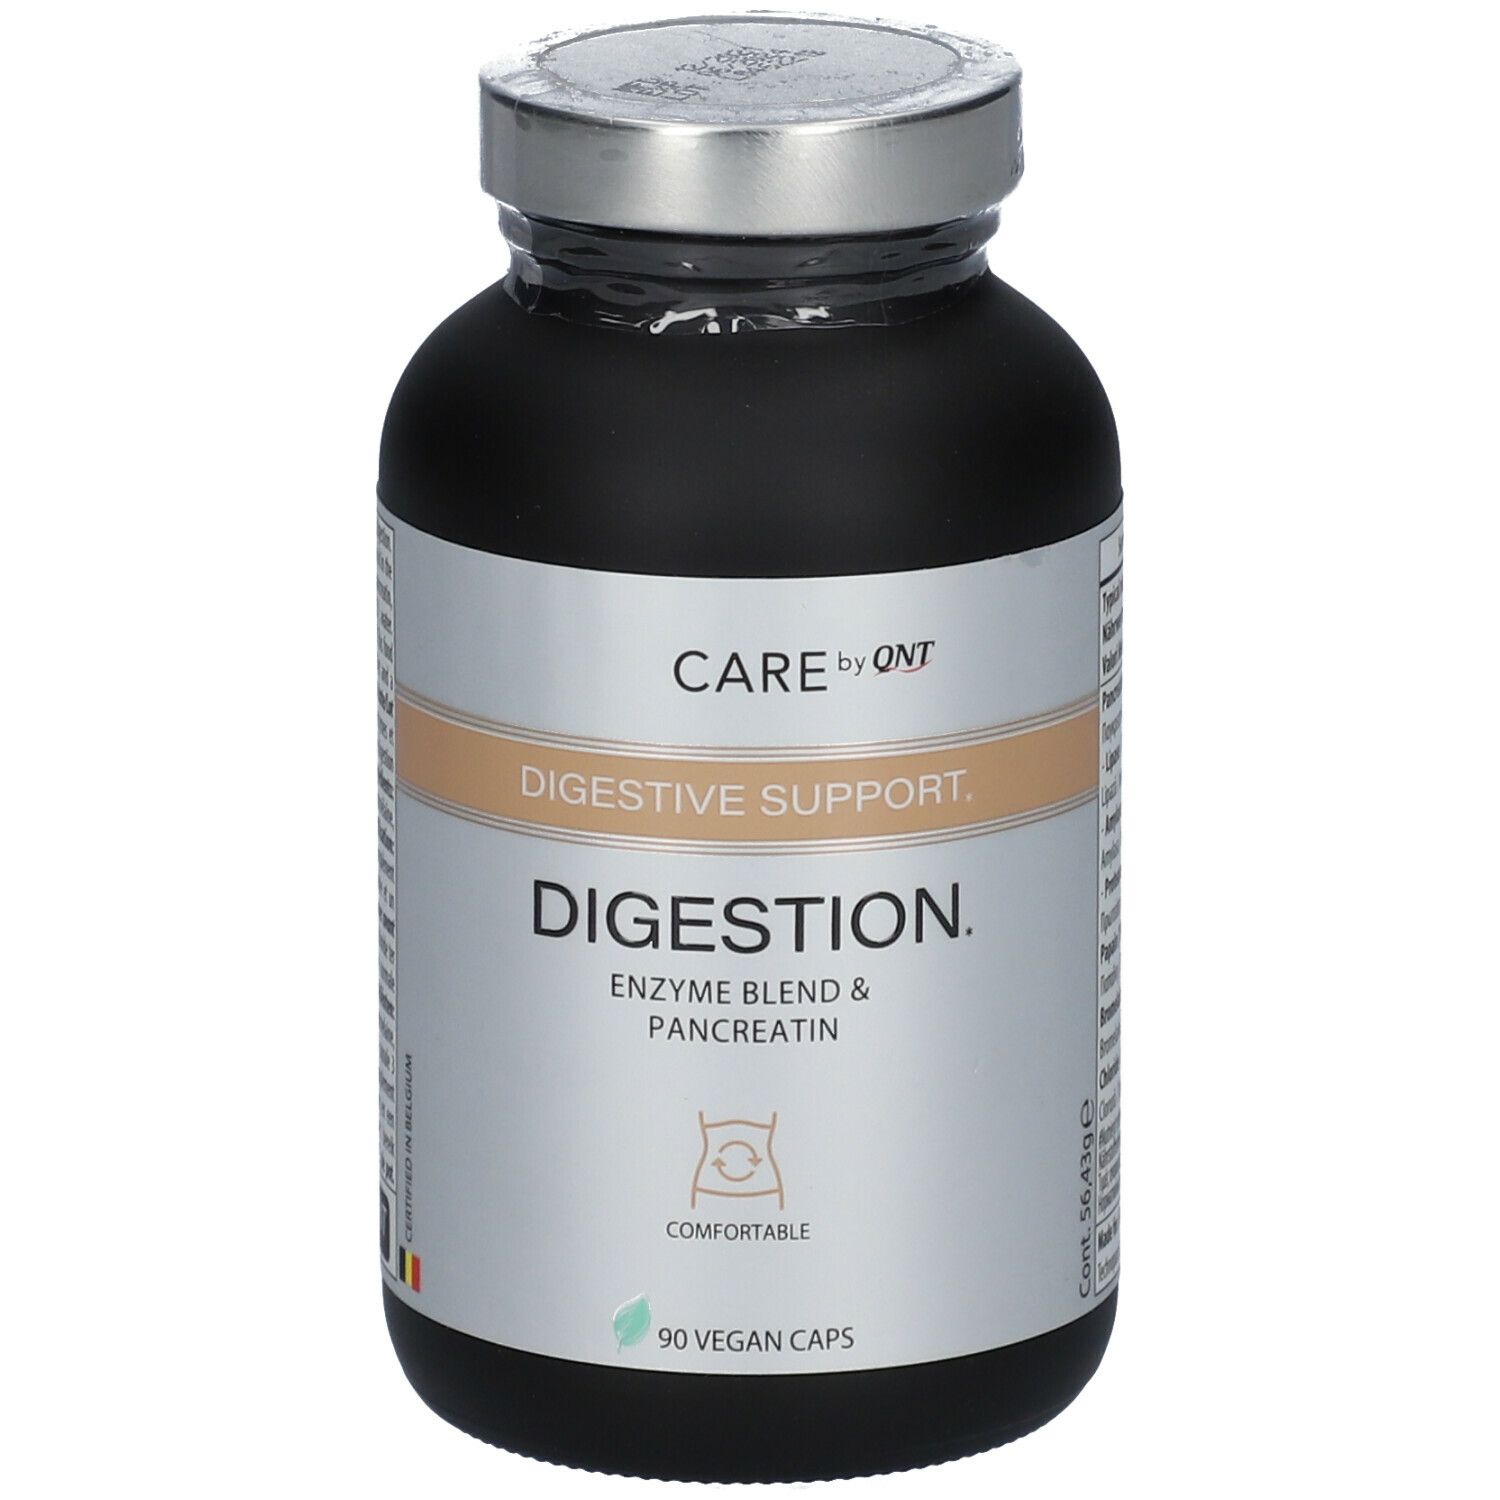 Care by QNT Digestive Support Digestion